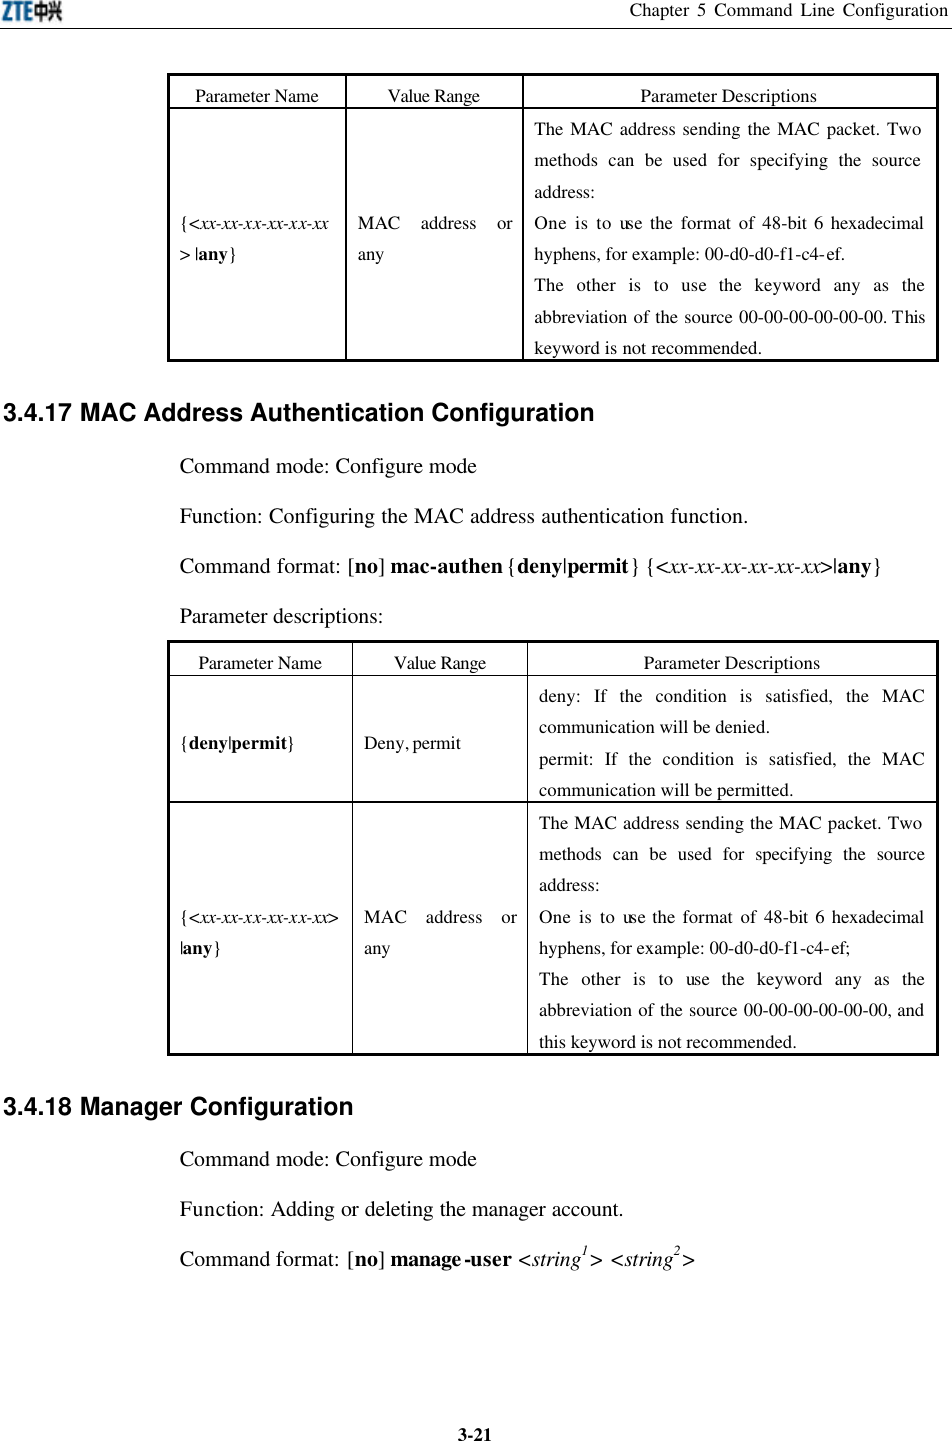 Chapter 5 Command Line Configuration  3-21Parameter Name Value Range Parameter Descriptions {&lt;xx-xx-xx-xx-xx-xx&gt; |any} MAC address or any The MAC address sending the MAC packet. Two methods can be used for specifying the source address:   One is to use the format of 48-bit 6 hexadecimal hyphens, for example: 00-d0-d0-f1-c4-ef. The other is to use the keyword any as the abbreviation of the source 00-00-00-00-00-00. This keyword is not recommended.  3.4.17 MAC Address Authentication Configuration  Command mode: Configure mode   Function: Configuring the MAC address authentication function.   Command format: [no] mac-authen {deny|permit} {&lt;xx-xx-xx-xx-xx-xx&gt;|any} Parameter descriptions:   Parameter Name Value Range Parameter Descriptions {deny|permit} Deny, permit deny: If the condition is satisfied, the MAC communication will be denied.   permit: If the condition is satisfied, the MAC communication will be permitted.   {&lt;xx-xx-xx-xx-xx-xx&gt; |any} MAC address or any The MAC address sending the MAC packet. Two methods can be used for specifying the source address:   One is to use the format of 48-bit 6 hexadecimal hyphens, for example: 00-d0-d0-f1-c4-ef;   The other is to use the keyword any as the abbreviation of the source 00-00-00-00-00-00, and this keyword is not recommended.   3.4.18 Manager Configuration  Command mode: Configure mode   Function: Adding or deleting the manager account.   Command format: [no] manage-user &lt;string1&gt; &lt;string2&gt;   